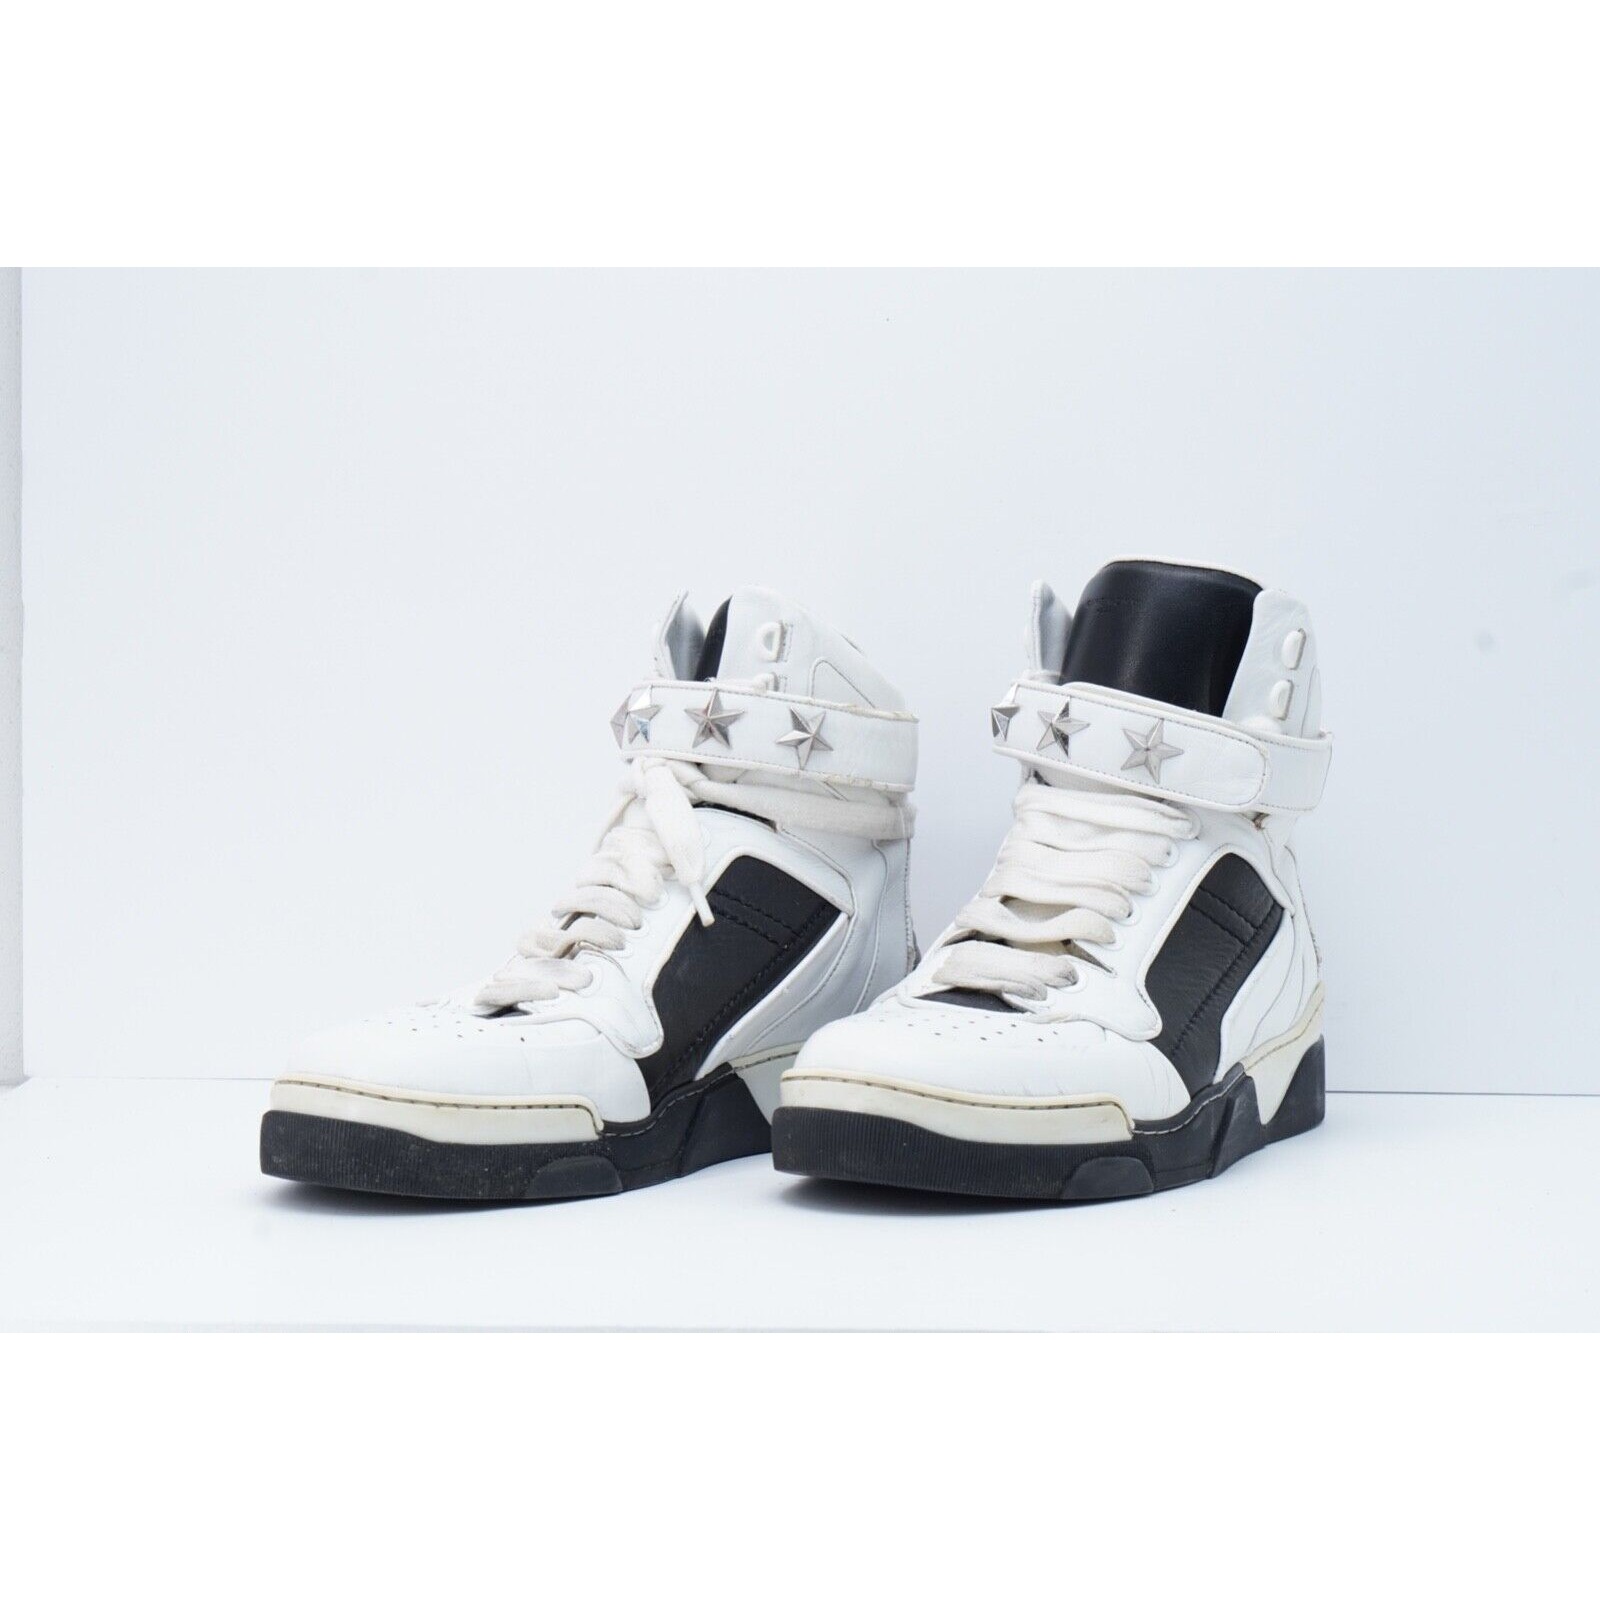 Givenchy Tyson Star Sneakers Shoes White Leather High Top 44 - 7